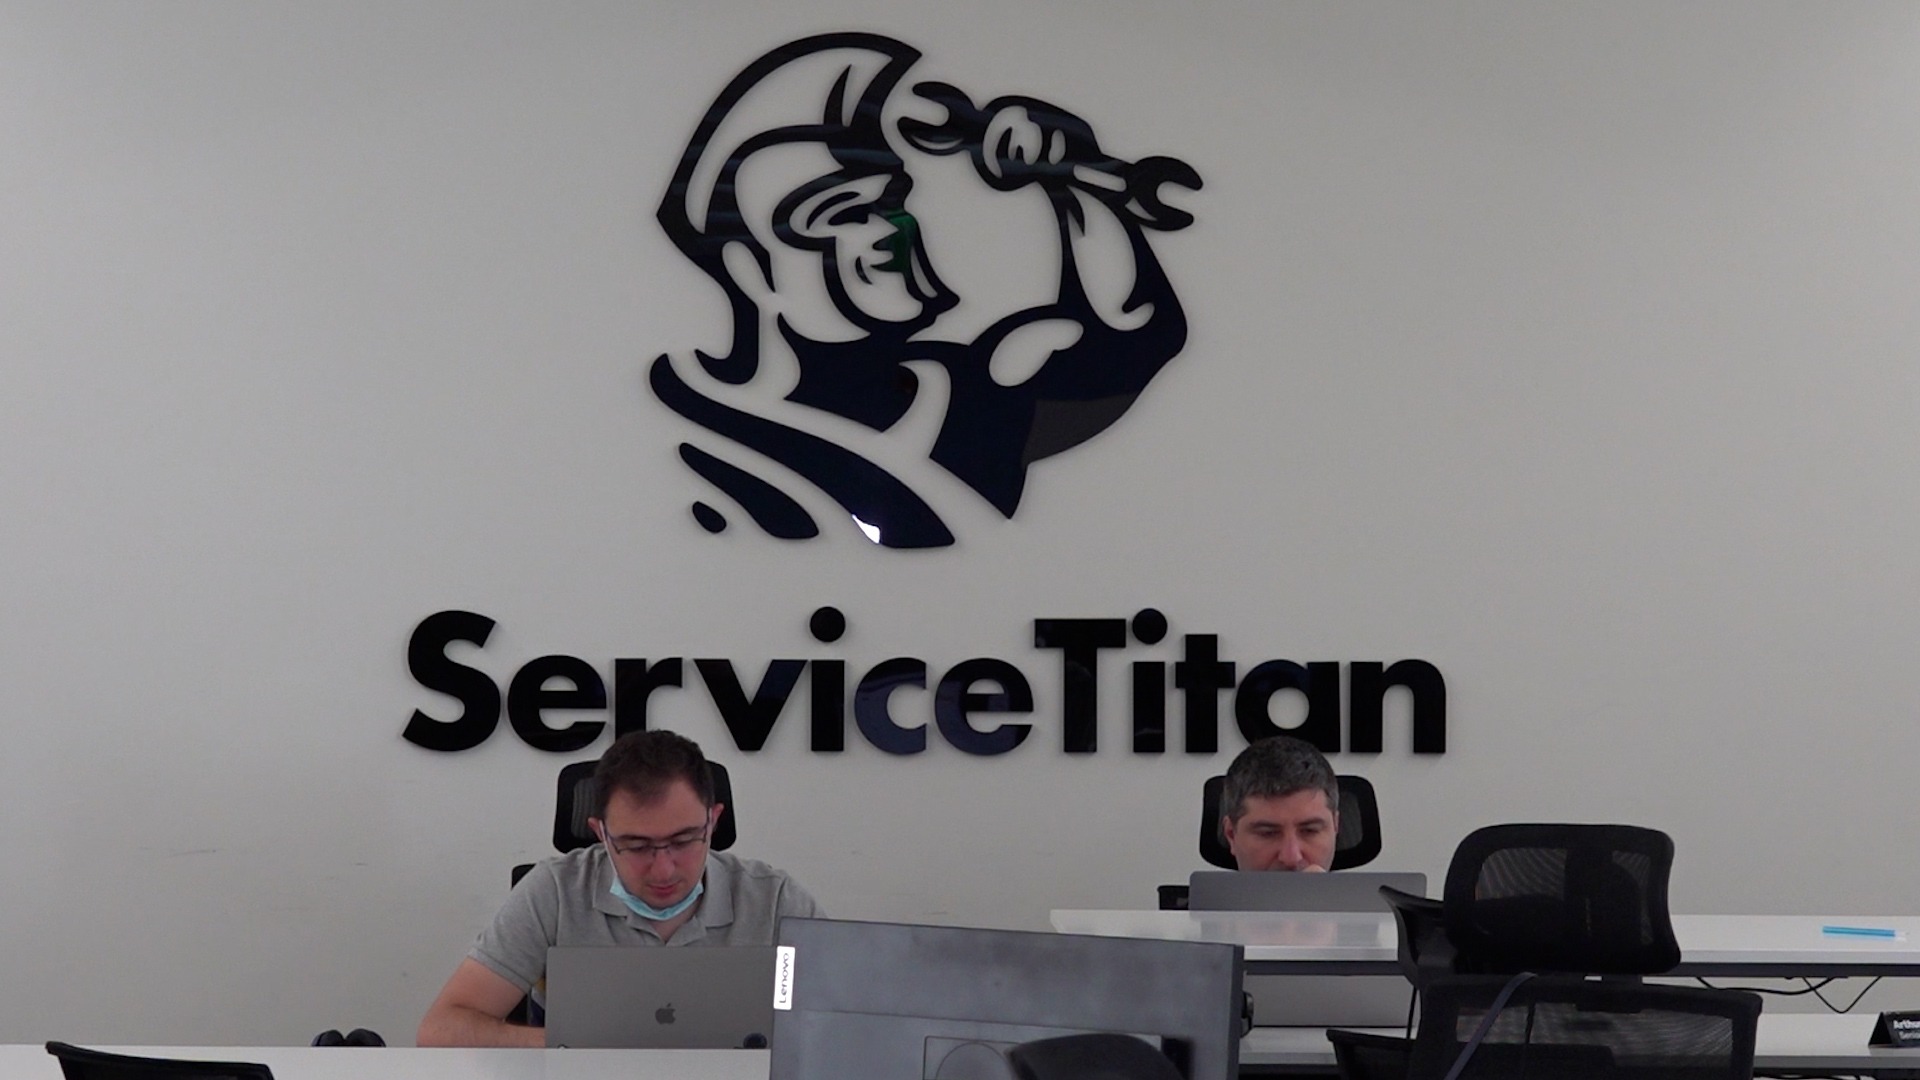 ServiceTitan, the Fast Growing Software Company Success in Armenia